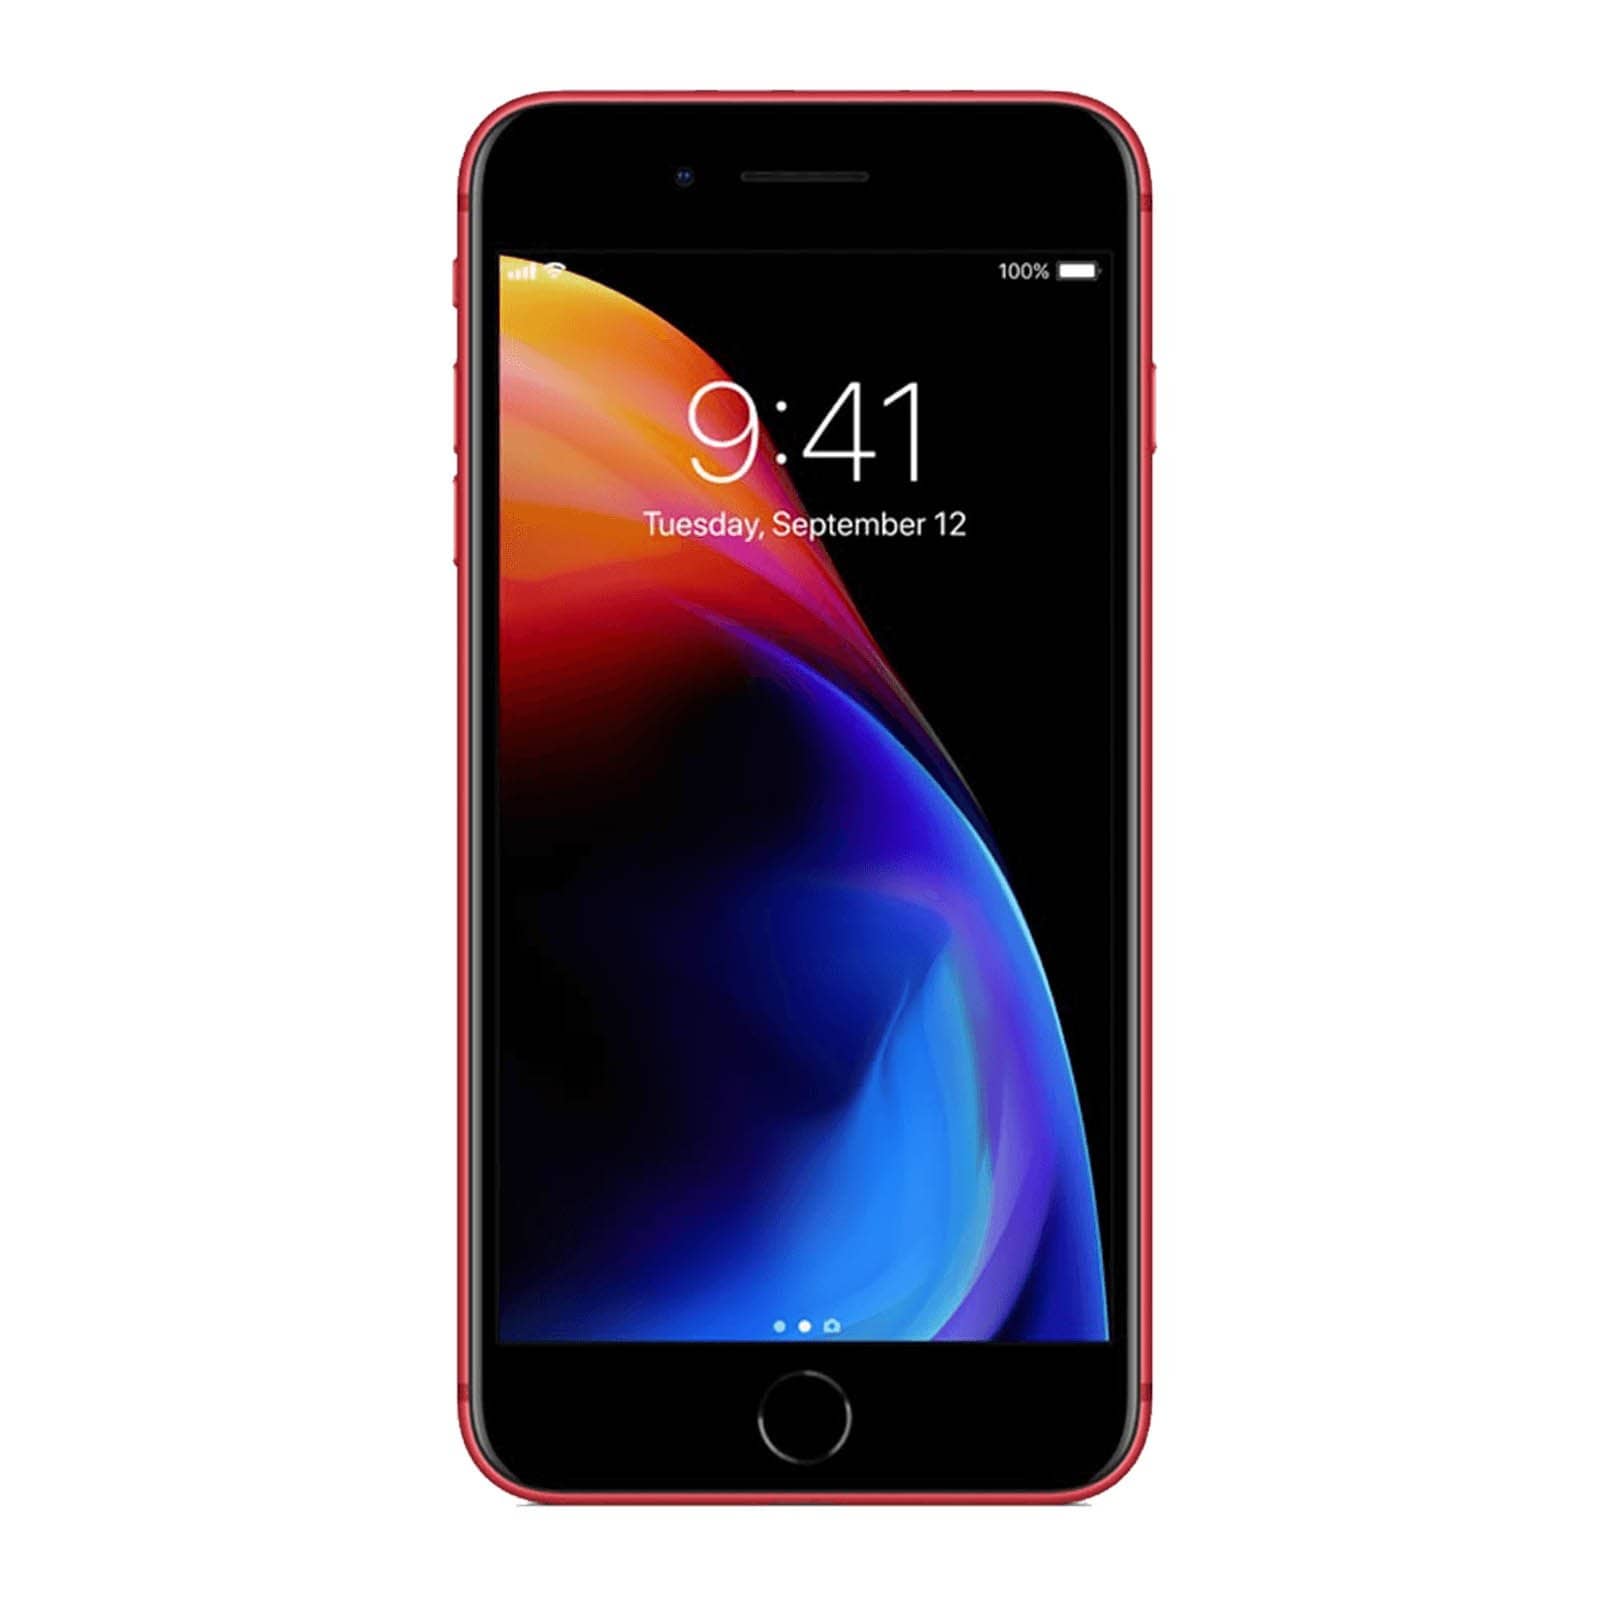 Apple iPhone 8 Plus 64GB Product Red Very Good - Unlocked